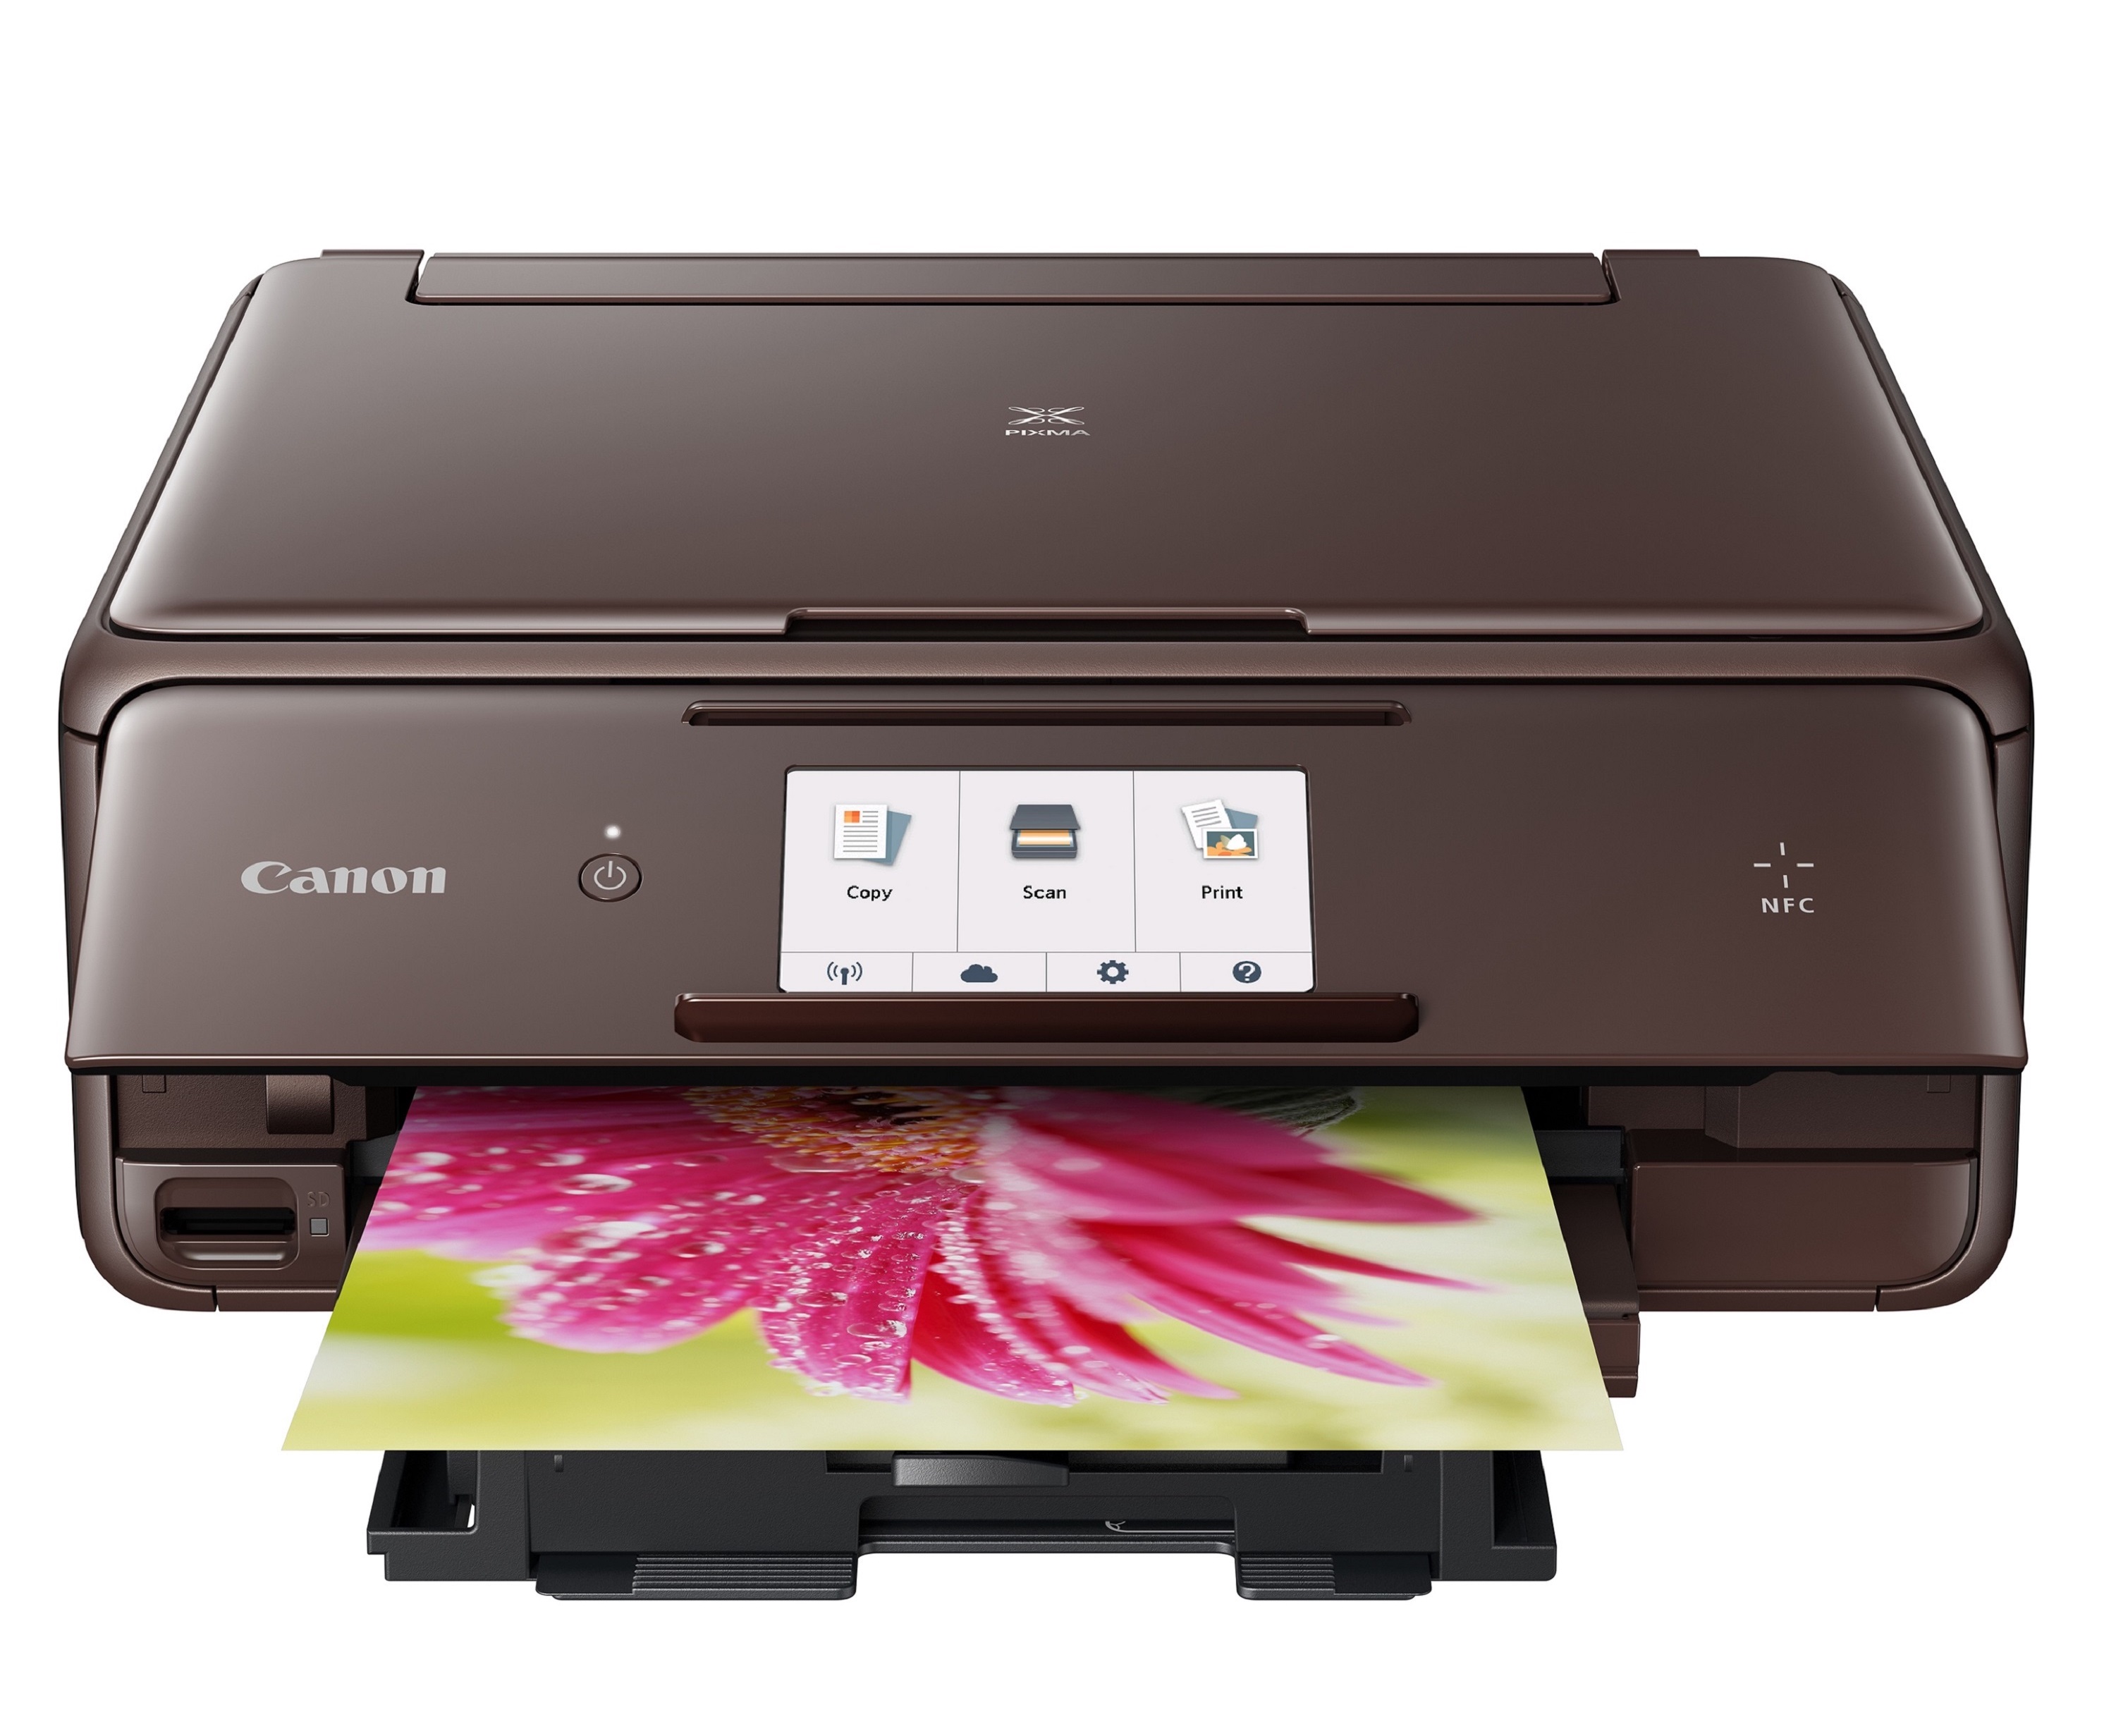 Canon India expands its inkjet printer portfolio for home and office